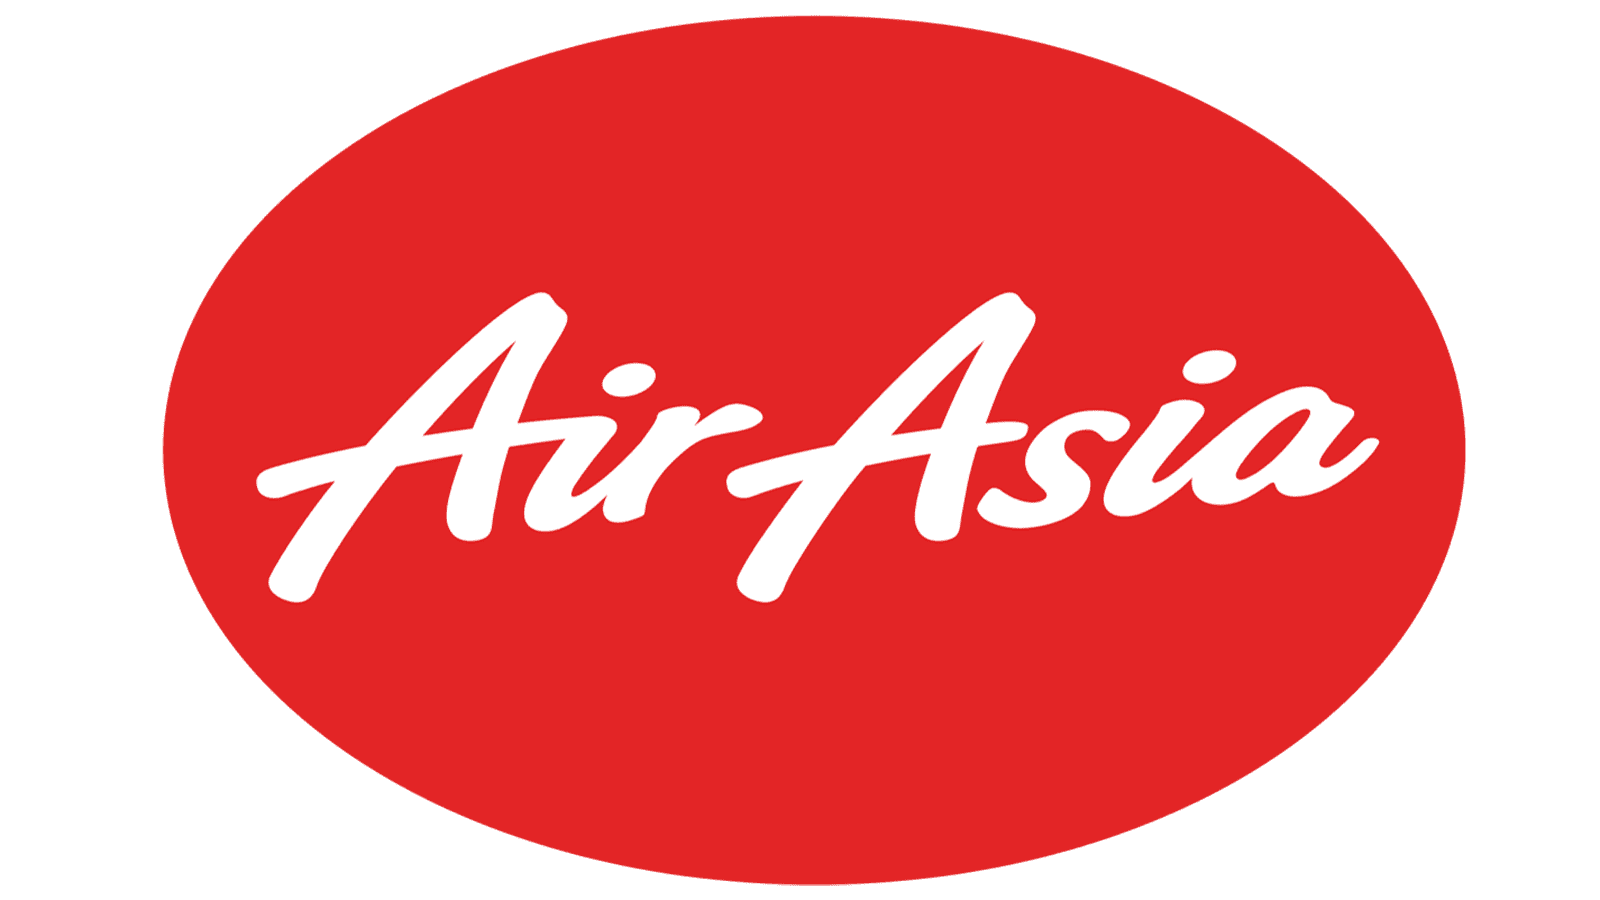 Airasia Pictures | Download Free Images on Unsplash